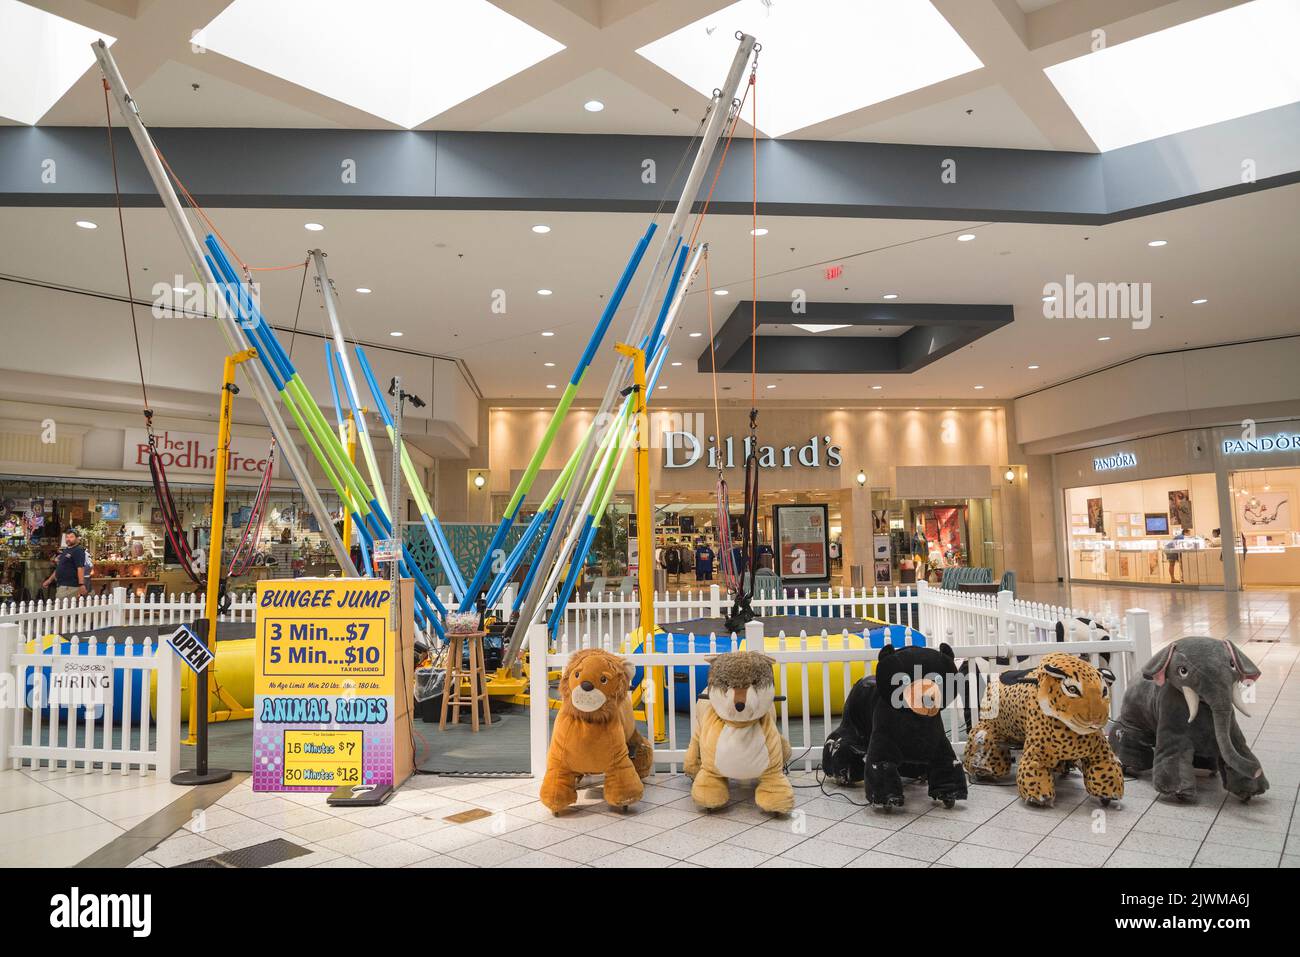 Play area for children inside a shopping mall in Gainesville, Florida. Stock Photo